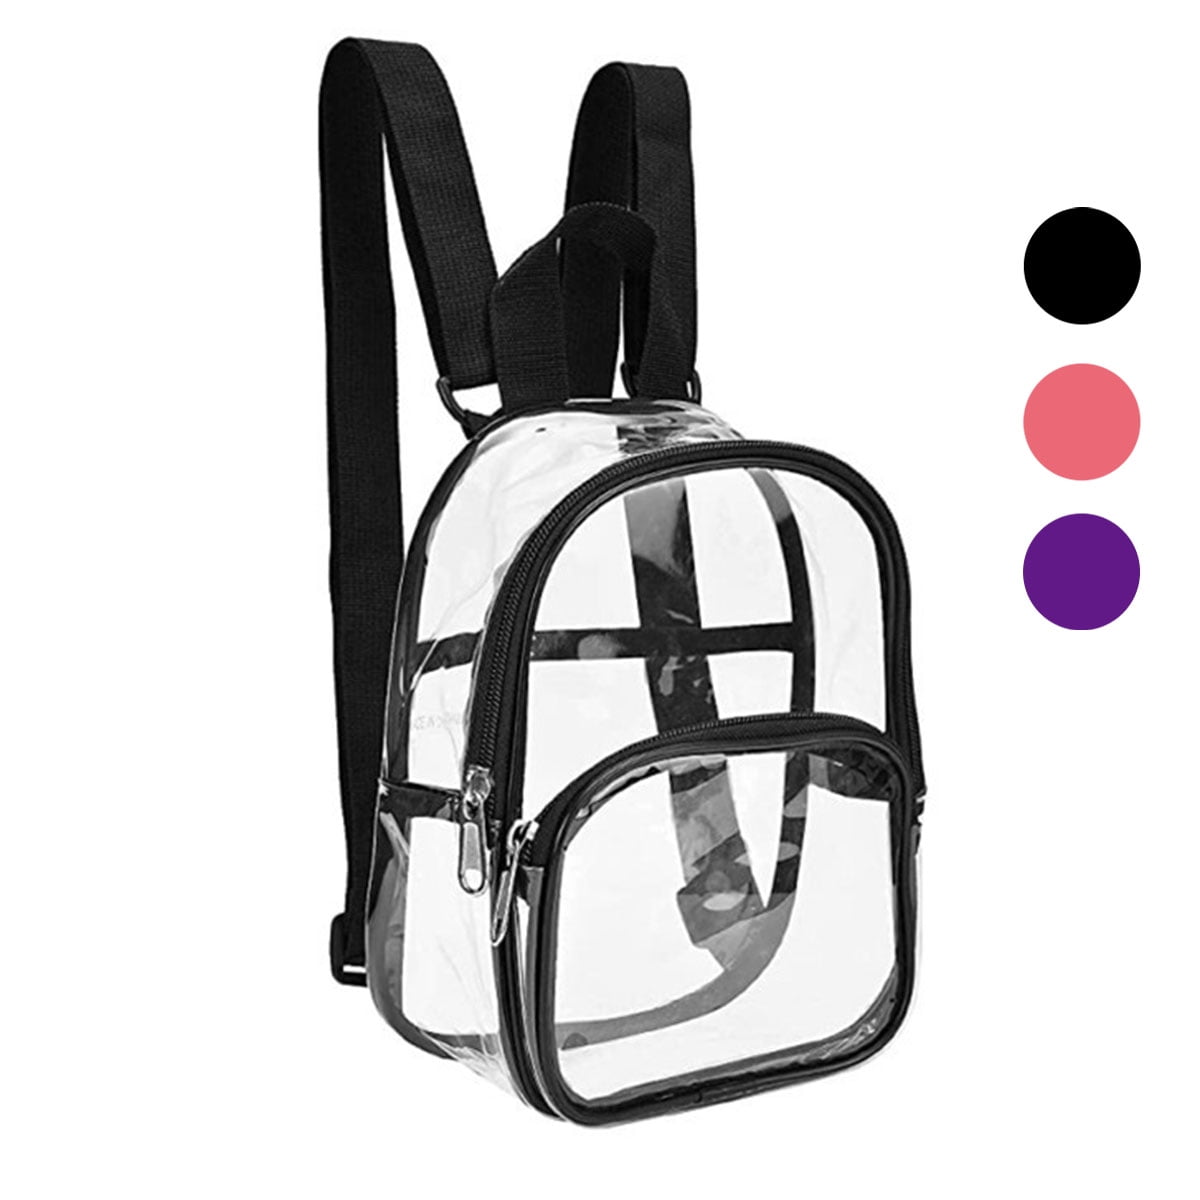 Details more than 90 clear book bags at walmart best - in.duhocakina